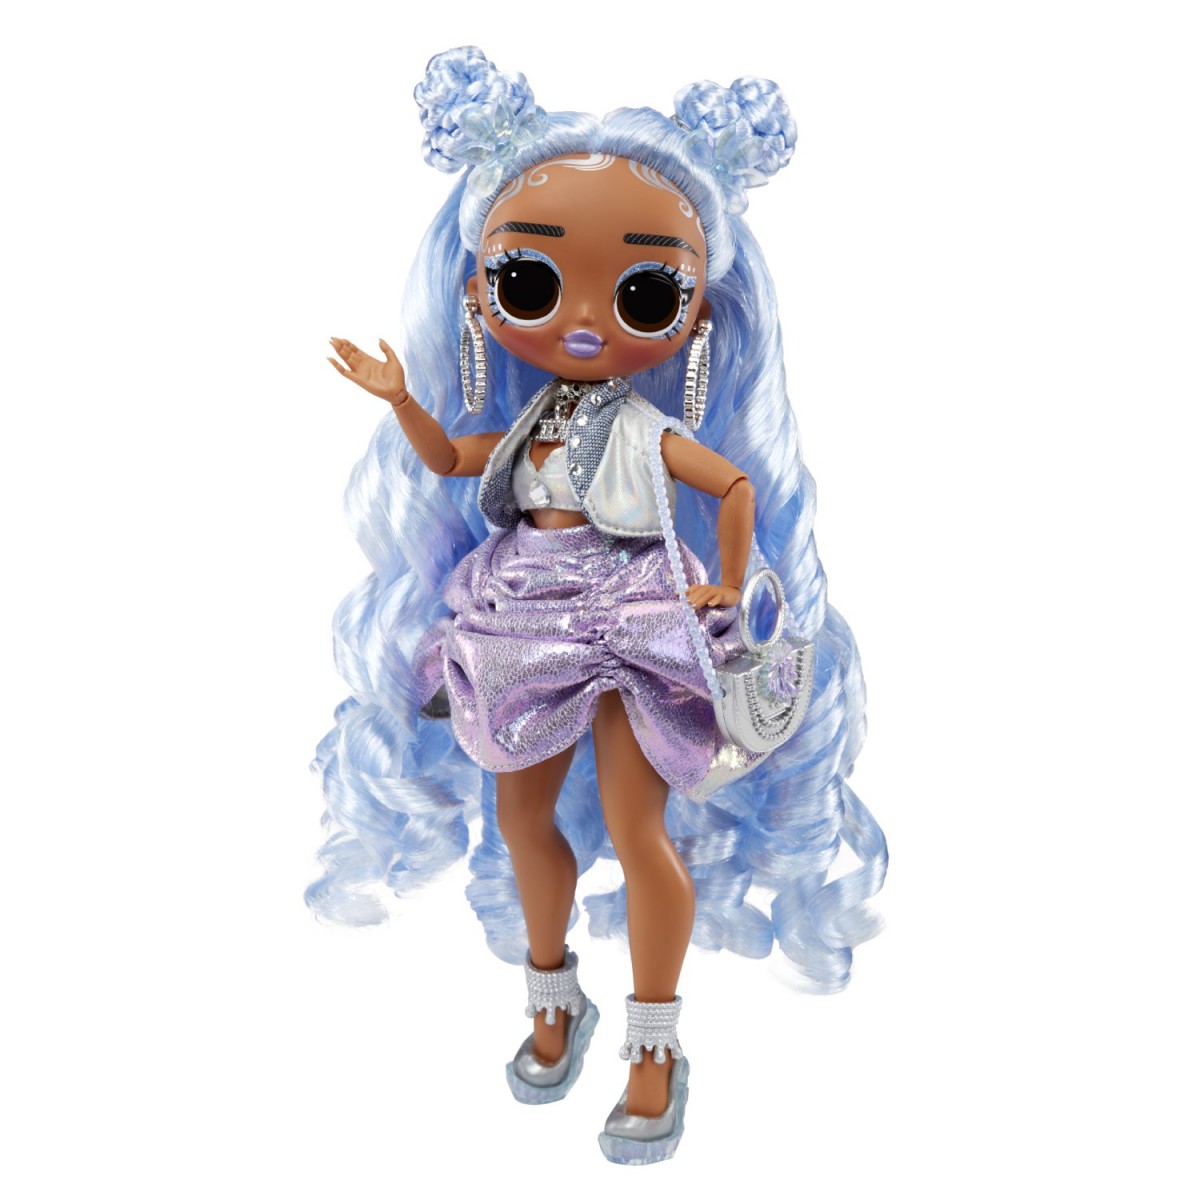 . Surprise OMG Fashion Show Style Edition - Missy Frost at Toys R Us UK